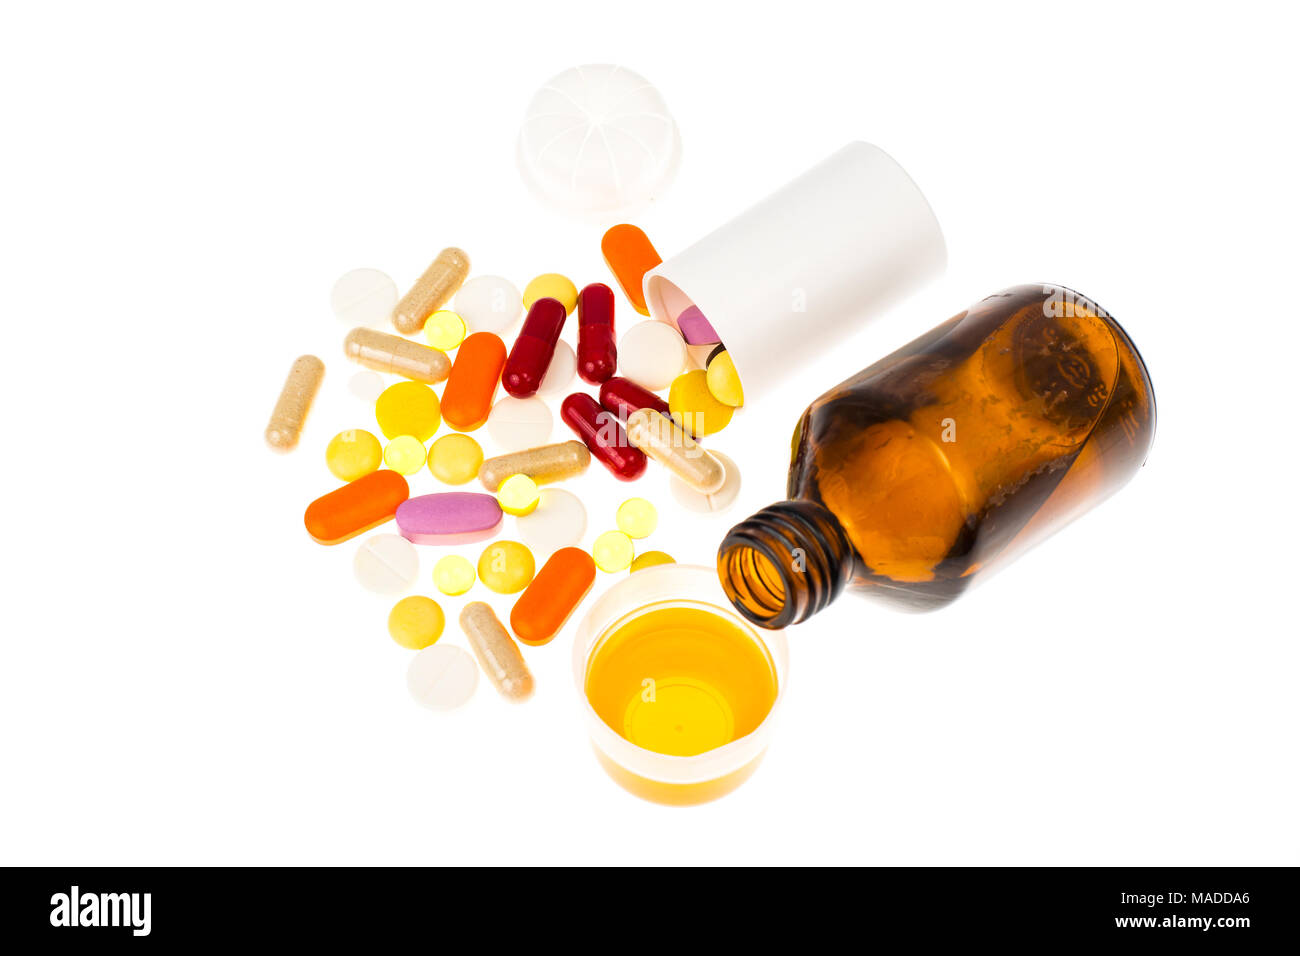 Tablets and syrups forms of medication. Studio Photo Stock Photo